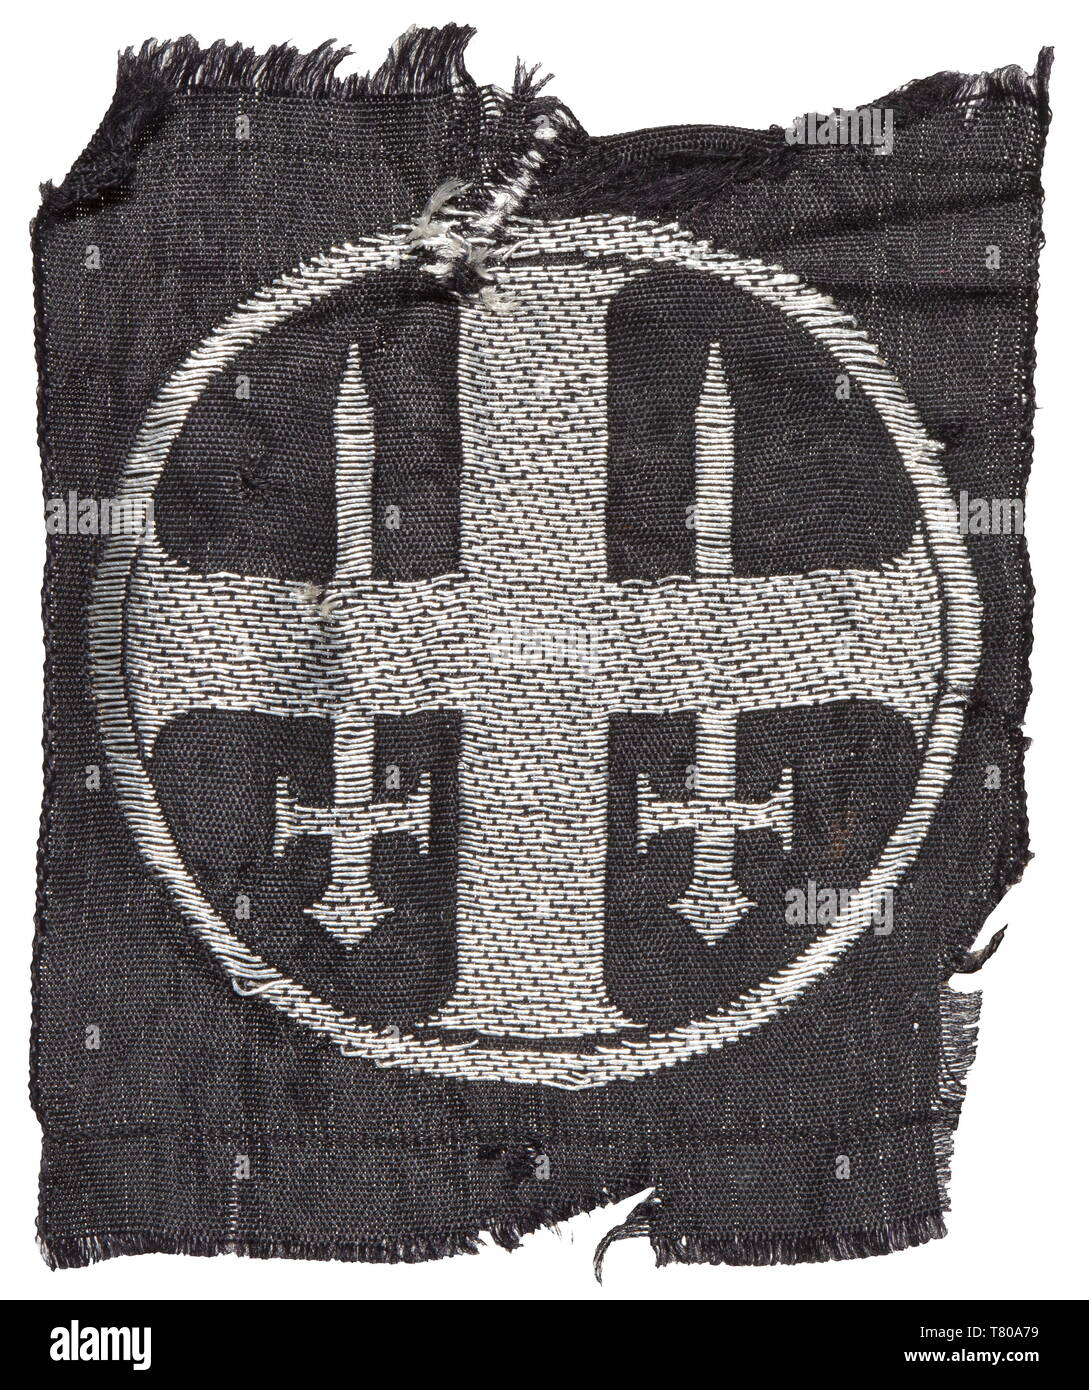 A sleeve badge for officers of the Norwegian Legion, who previously were members of the Nasjonal Samling Rikshird (equivalent to the German SA). Silver-woven Sonnenkreuz (Sun Cross) with applied swords on a black background. Unissued, damaged. historic, historical, 20th century, 1930s, 1940s, secret service, security service, secret services, security services, police, armed service, armed services, NS, National Socialism, Nazism, Third Reich, German Reich, Germany, utensil, piece of equipment, utensils, object, objects, stills, clipping, clippings, cut out, cut-out, cut-ou, Editorial-Use-Only Stock Photo